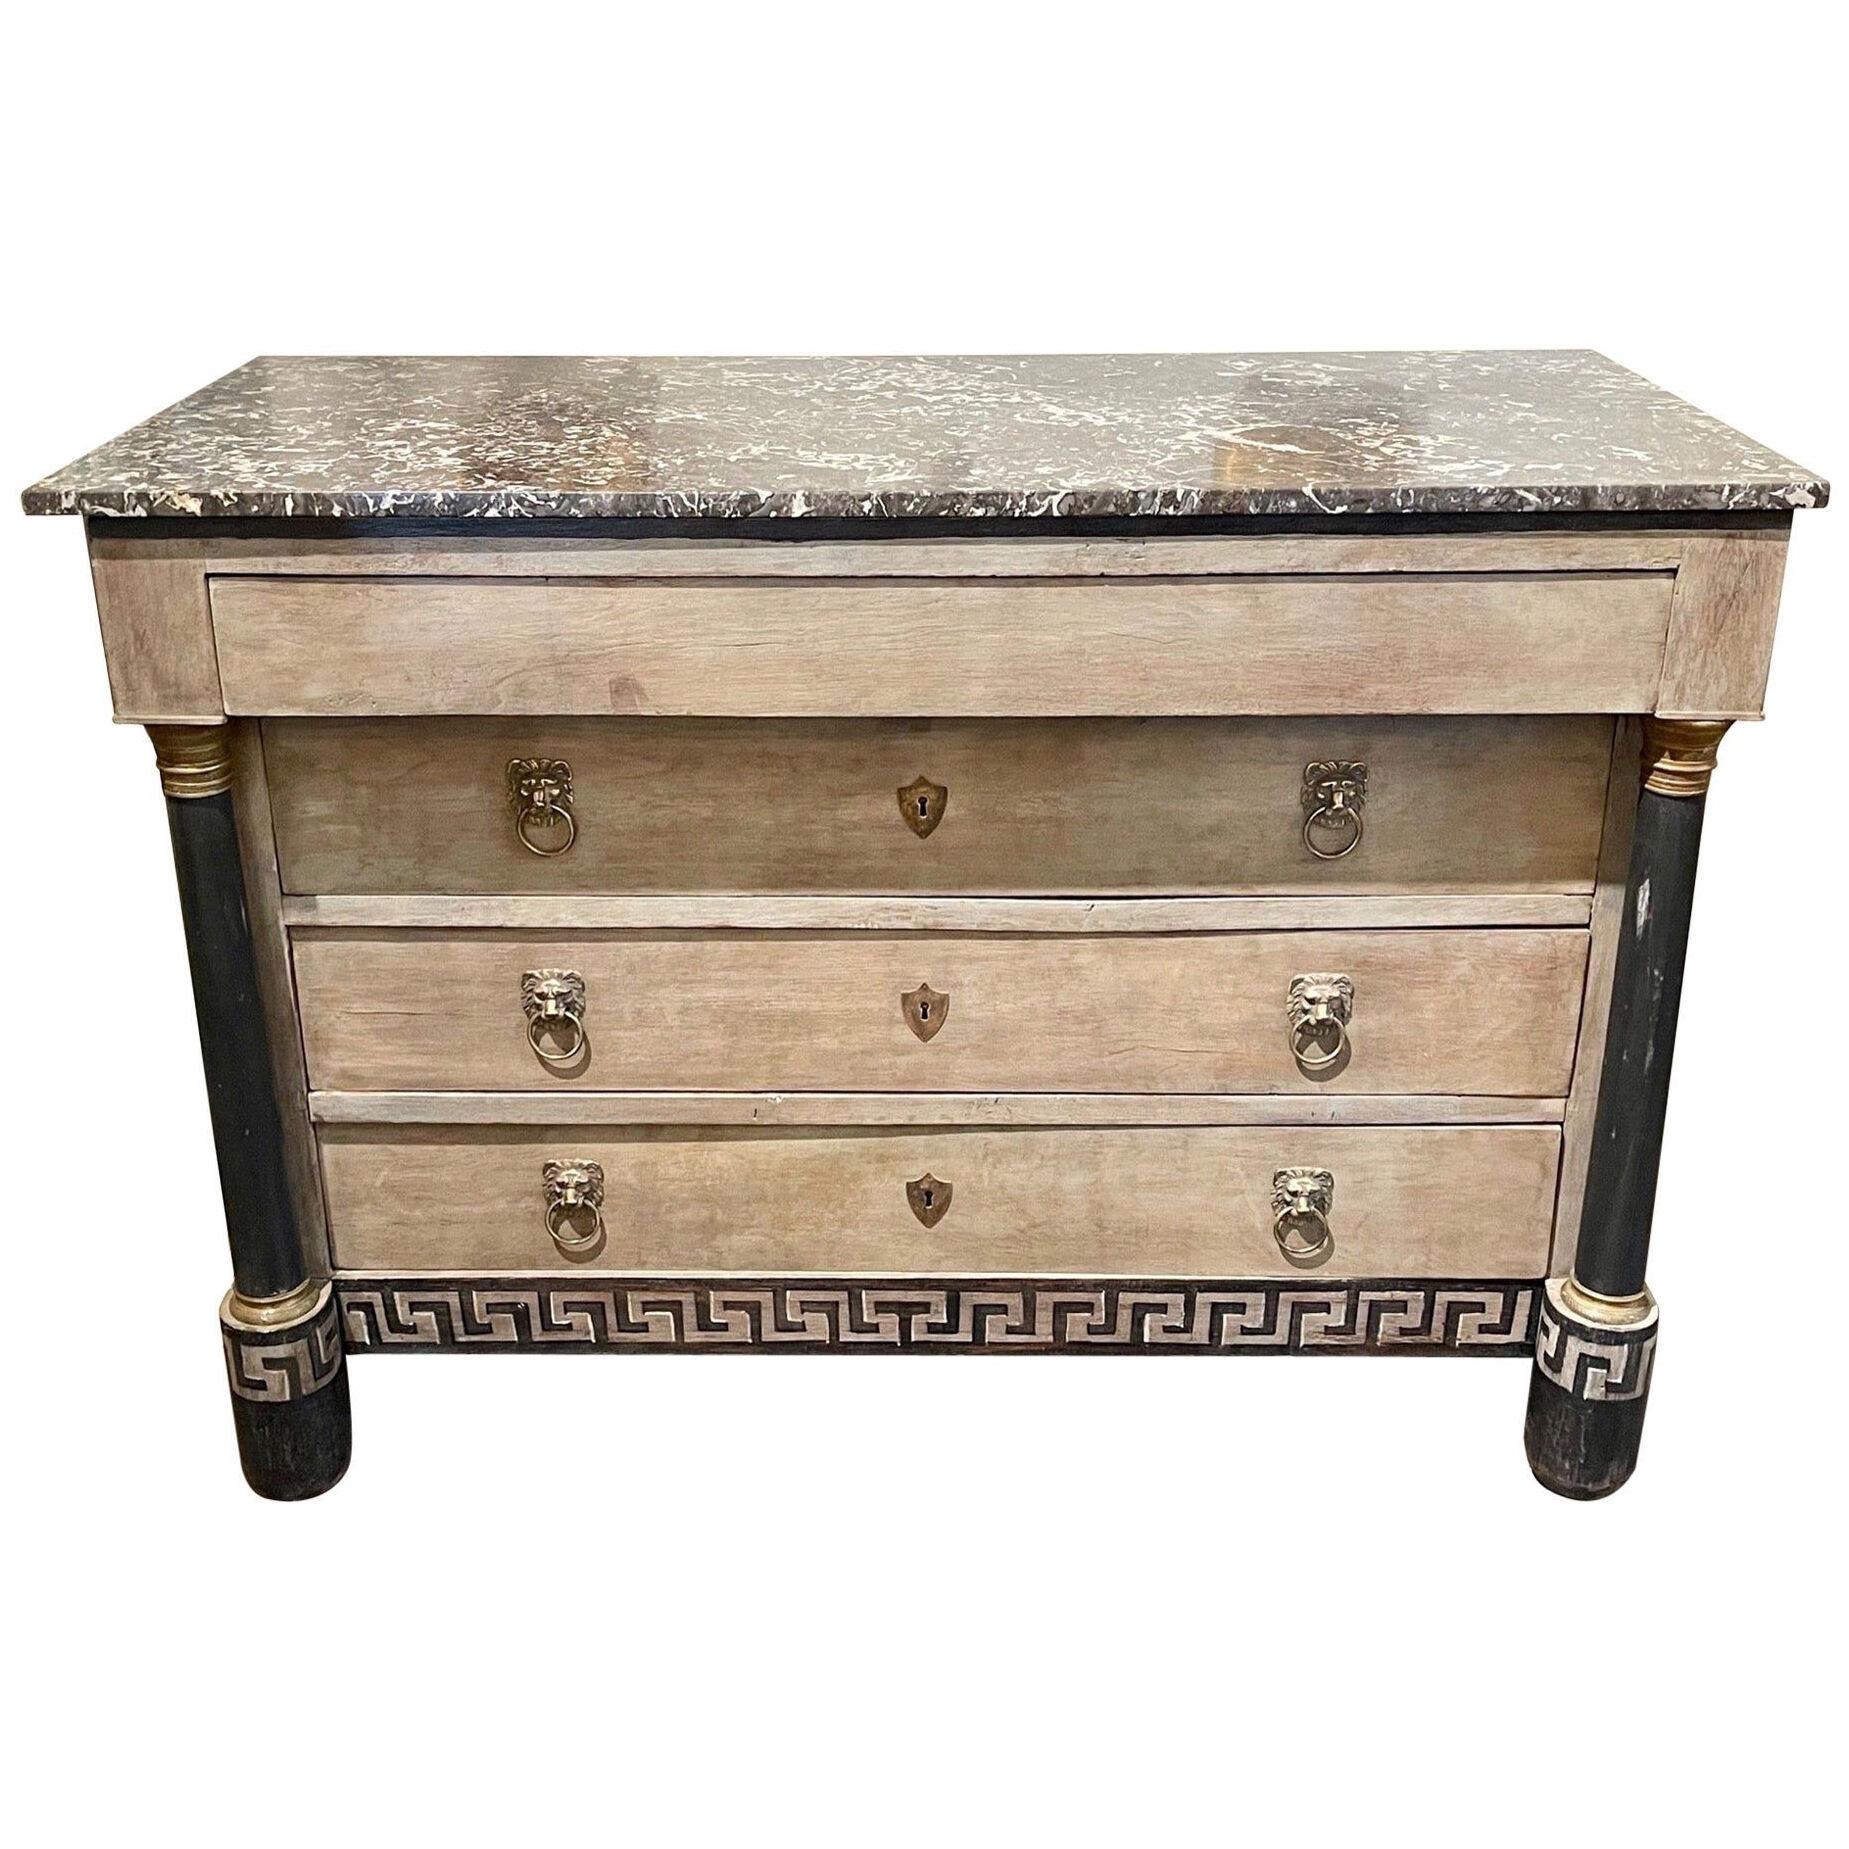 19th Century French Empire Painted Commode with Greek Key Pattern